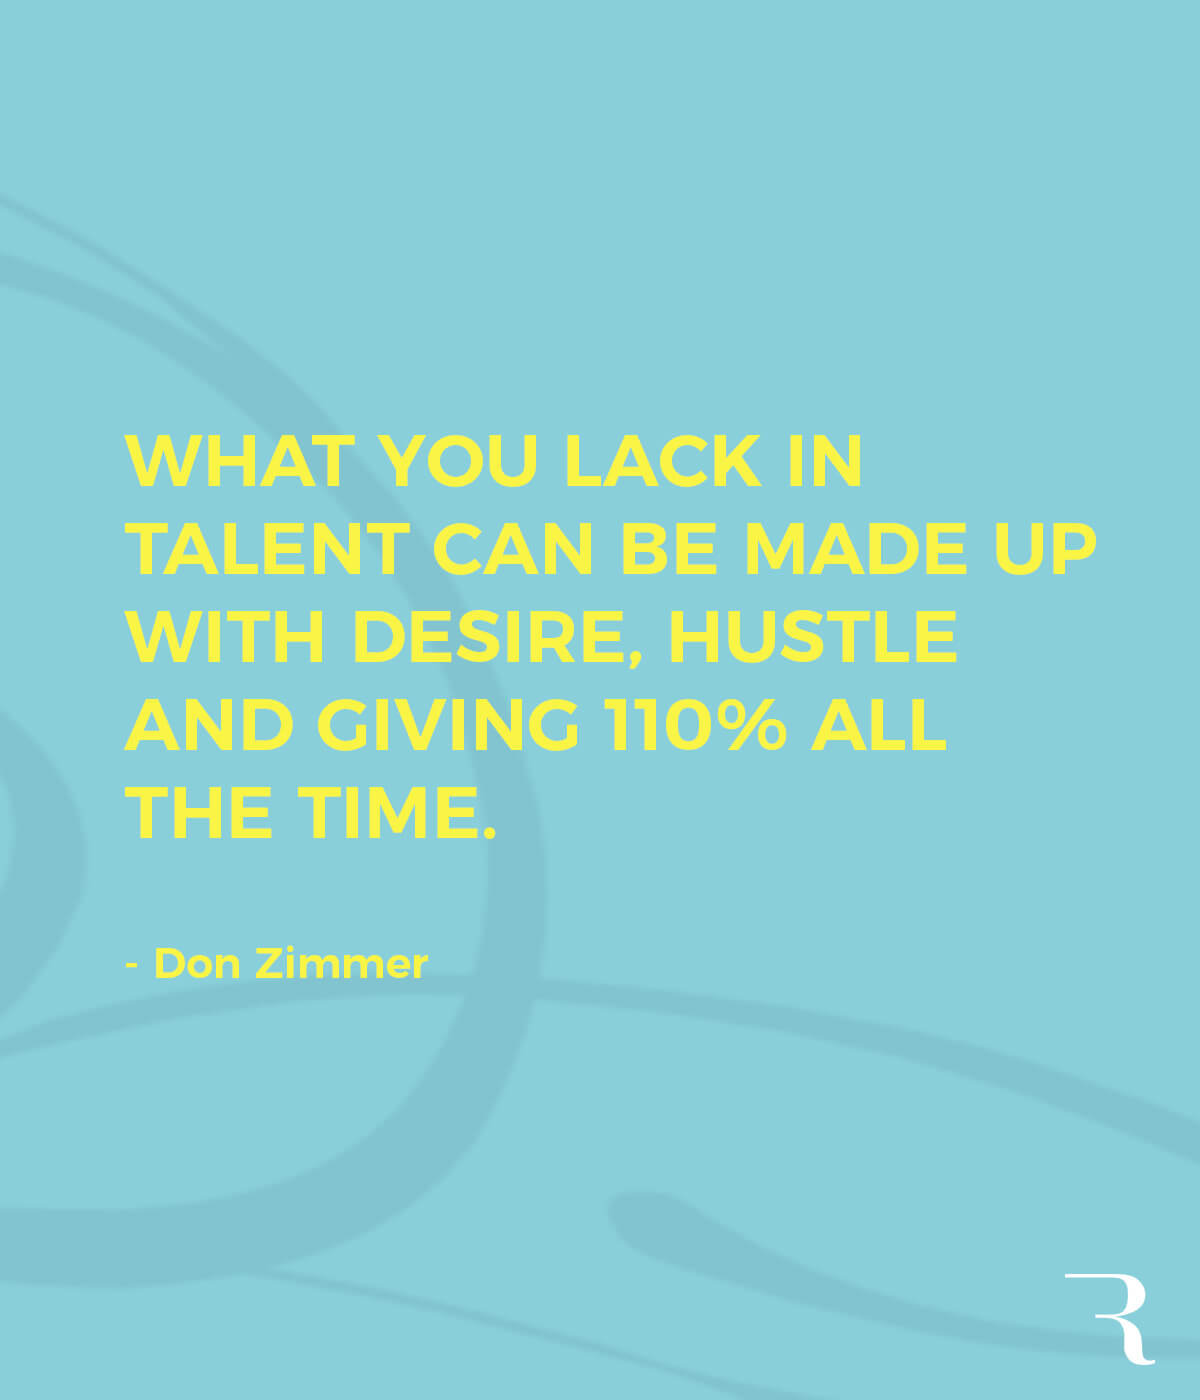 Motivational Quotes: “What you lack in talent can be made up with desire, hustle and giving 110% all the time.” 112 Motivational Quotes to Be a Better Entrepreneur